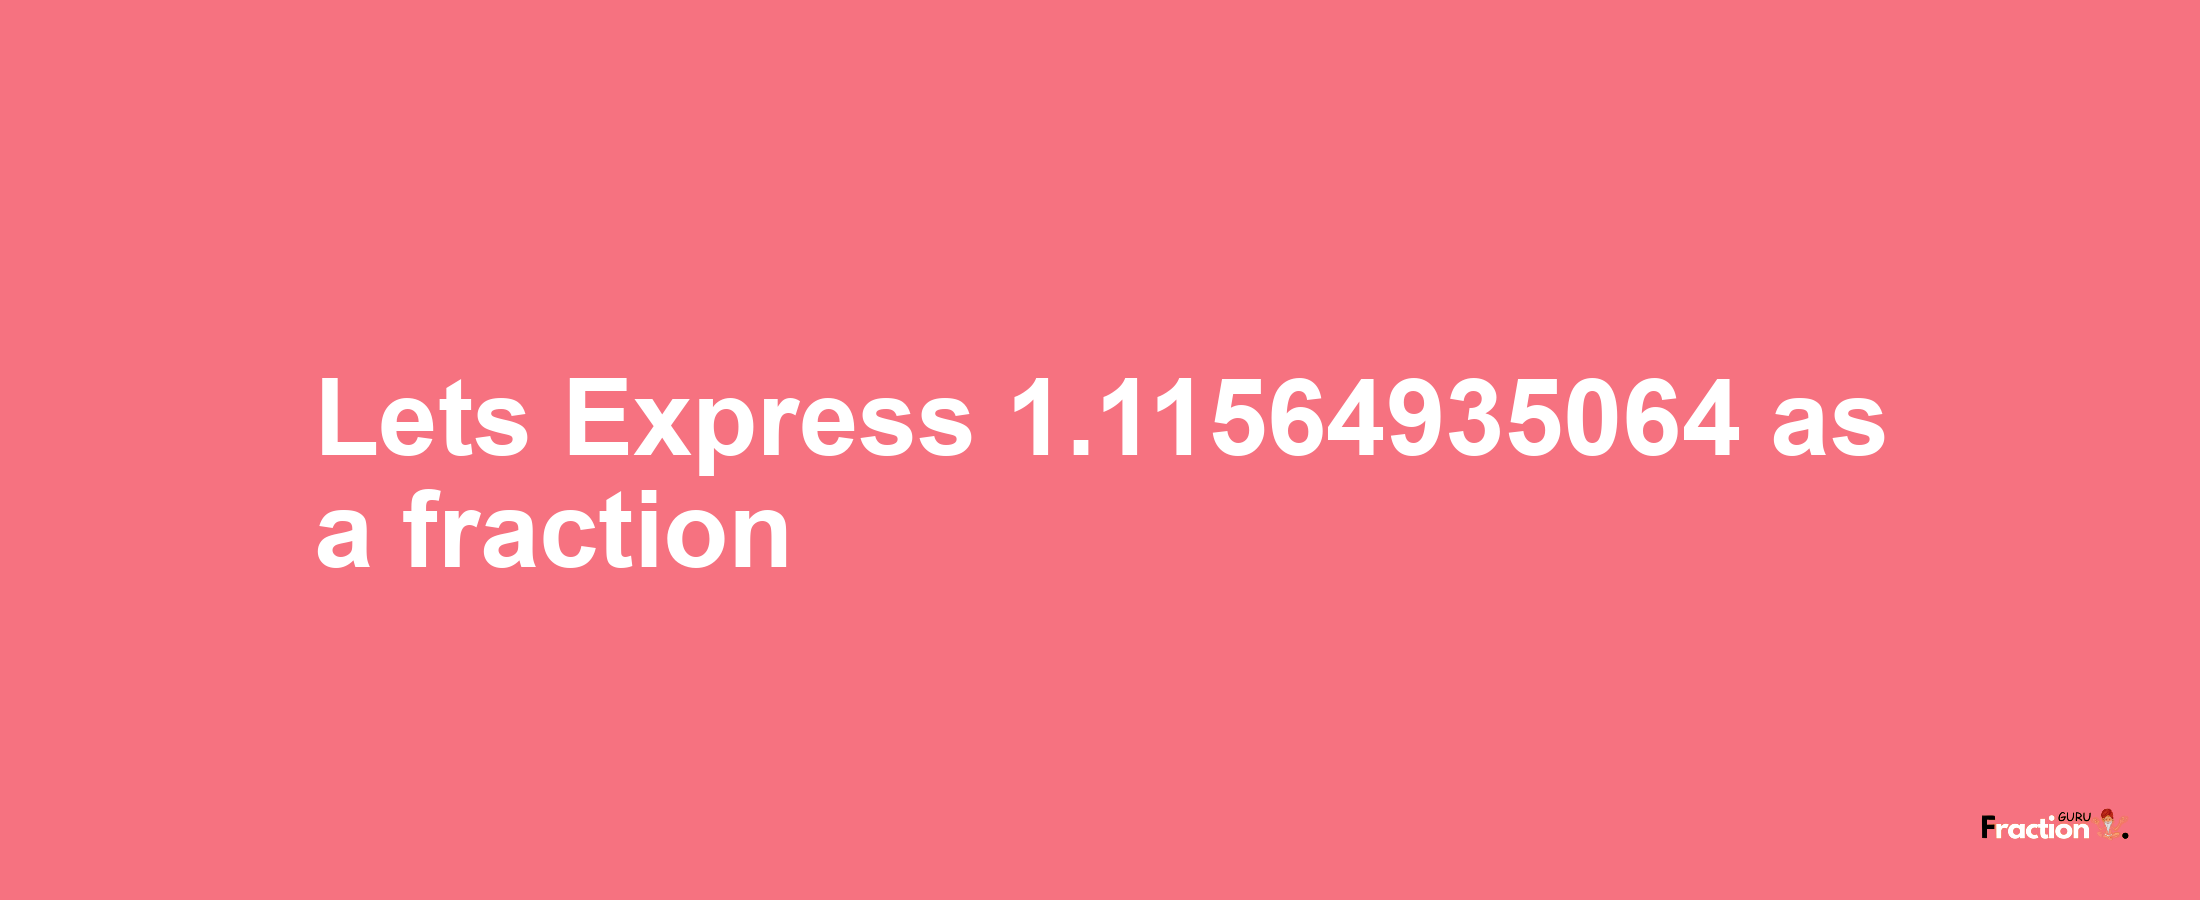 Lets Express 1.11564935064 as afraction